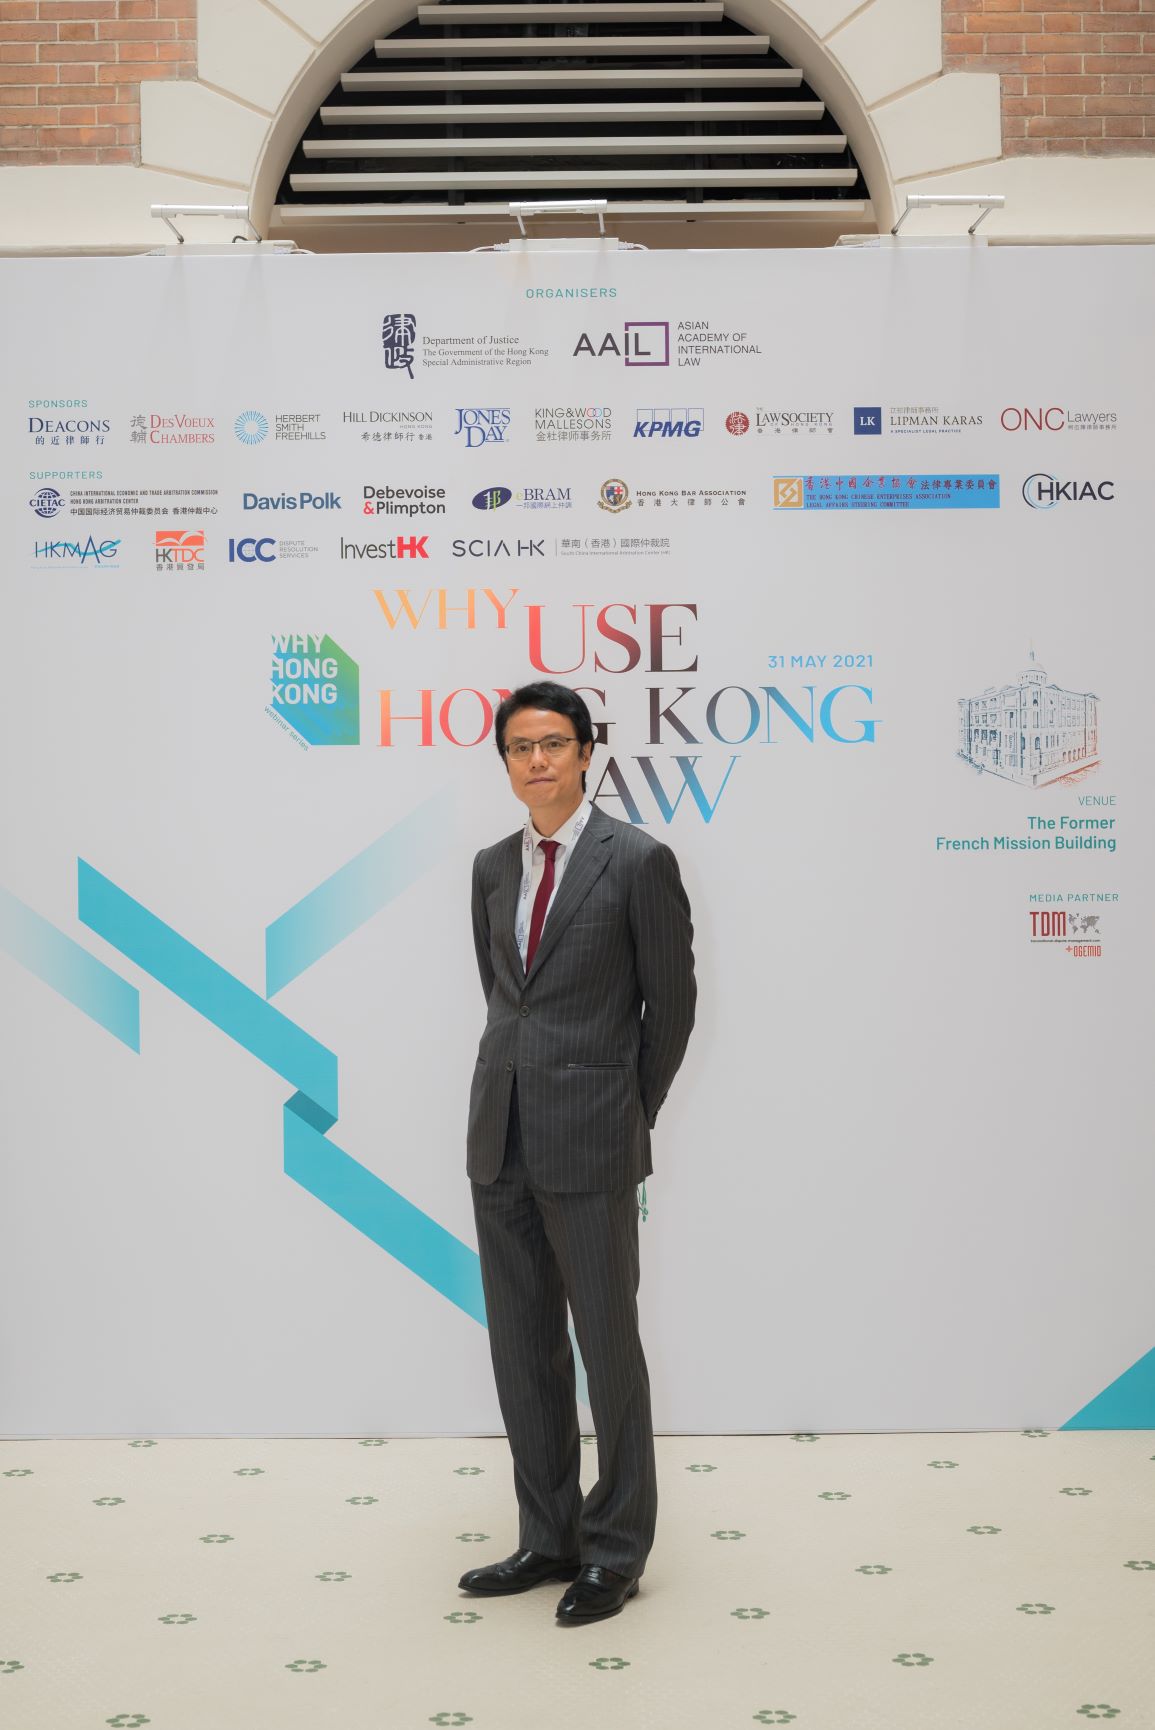 Mr Ludwig Ng was convenor of the panel discussion in the “Why Use Hong Kong Law” webinar organised by the Asian Academy of International Law